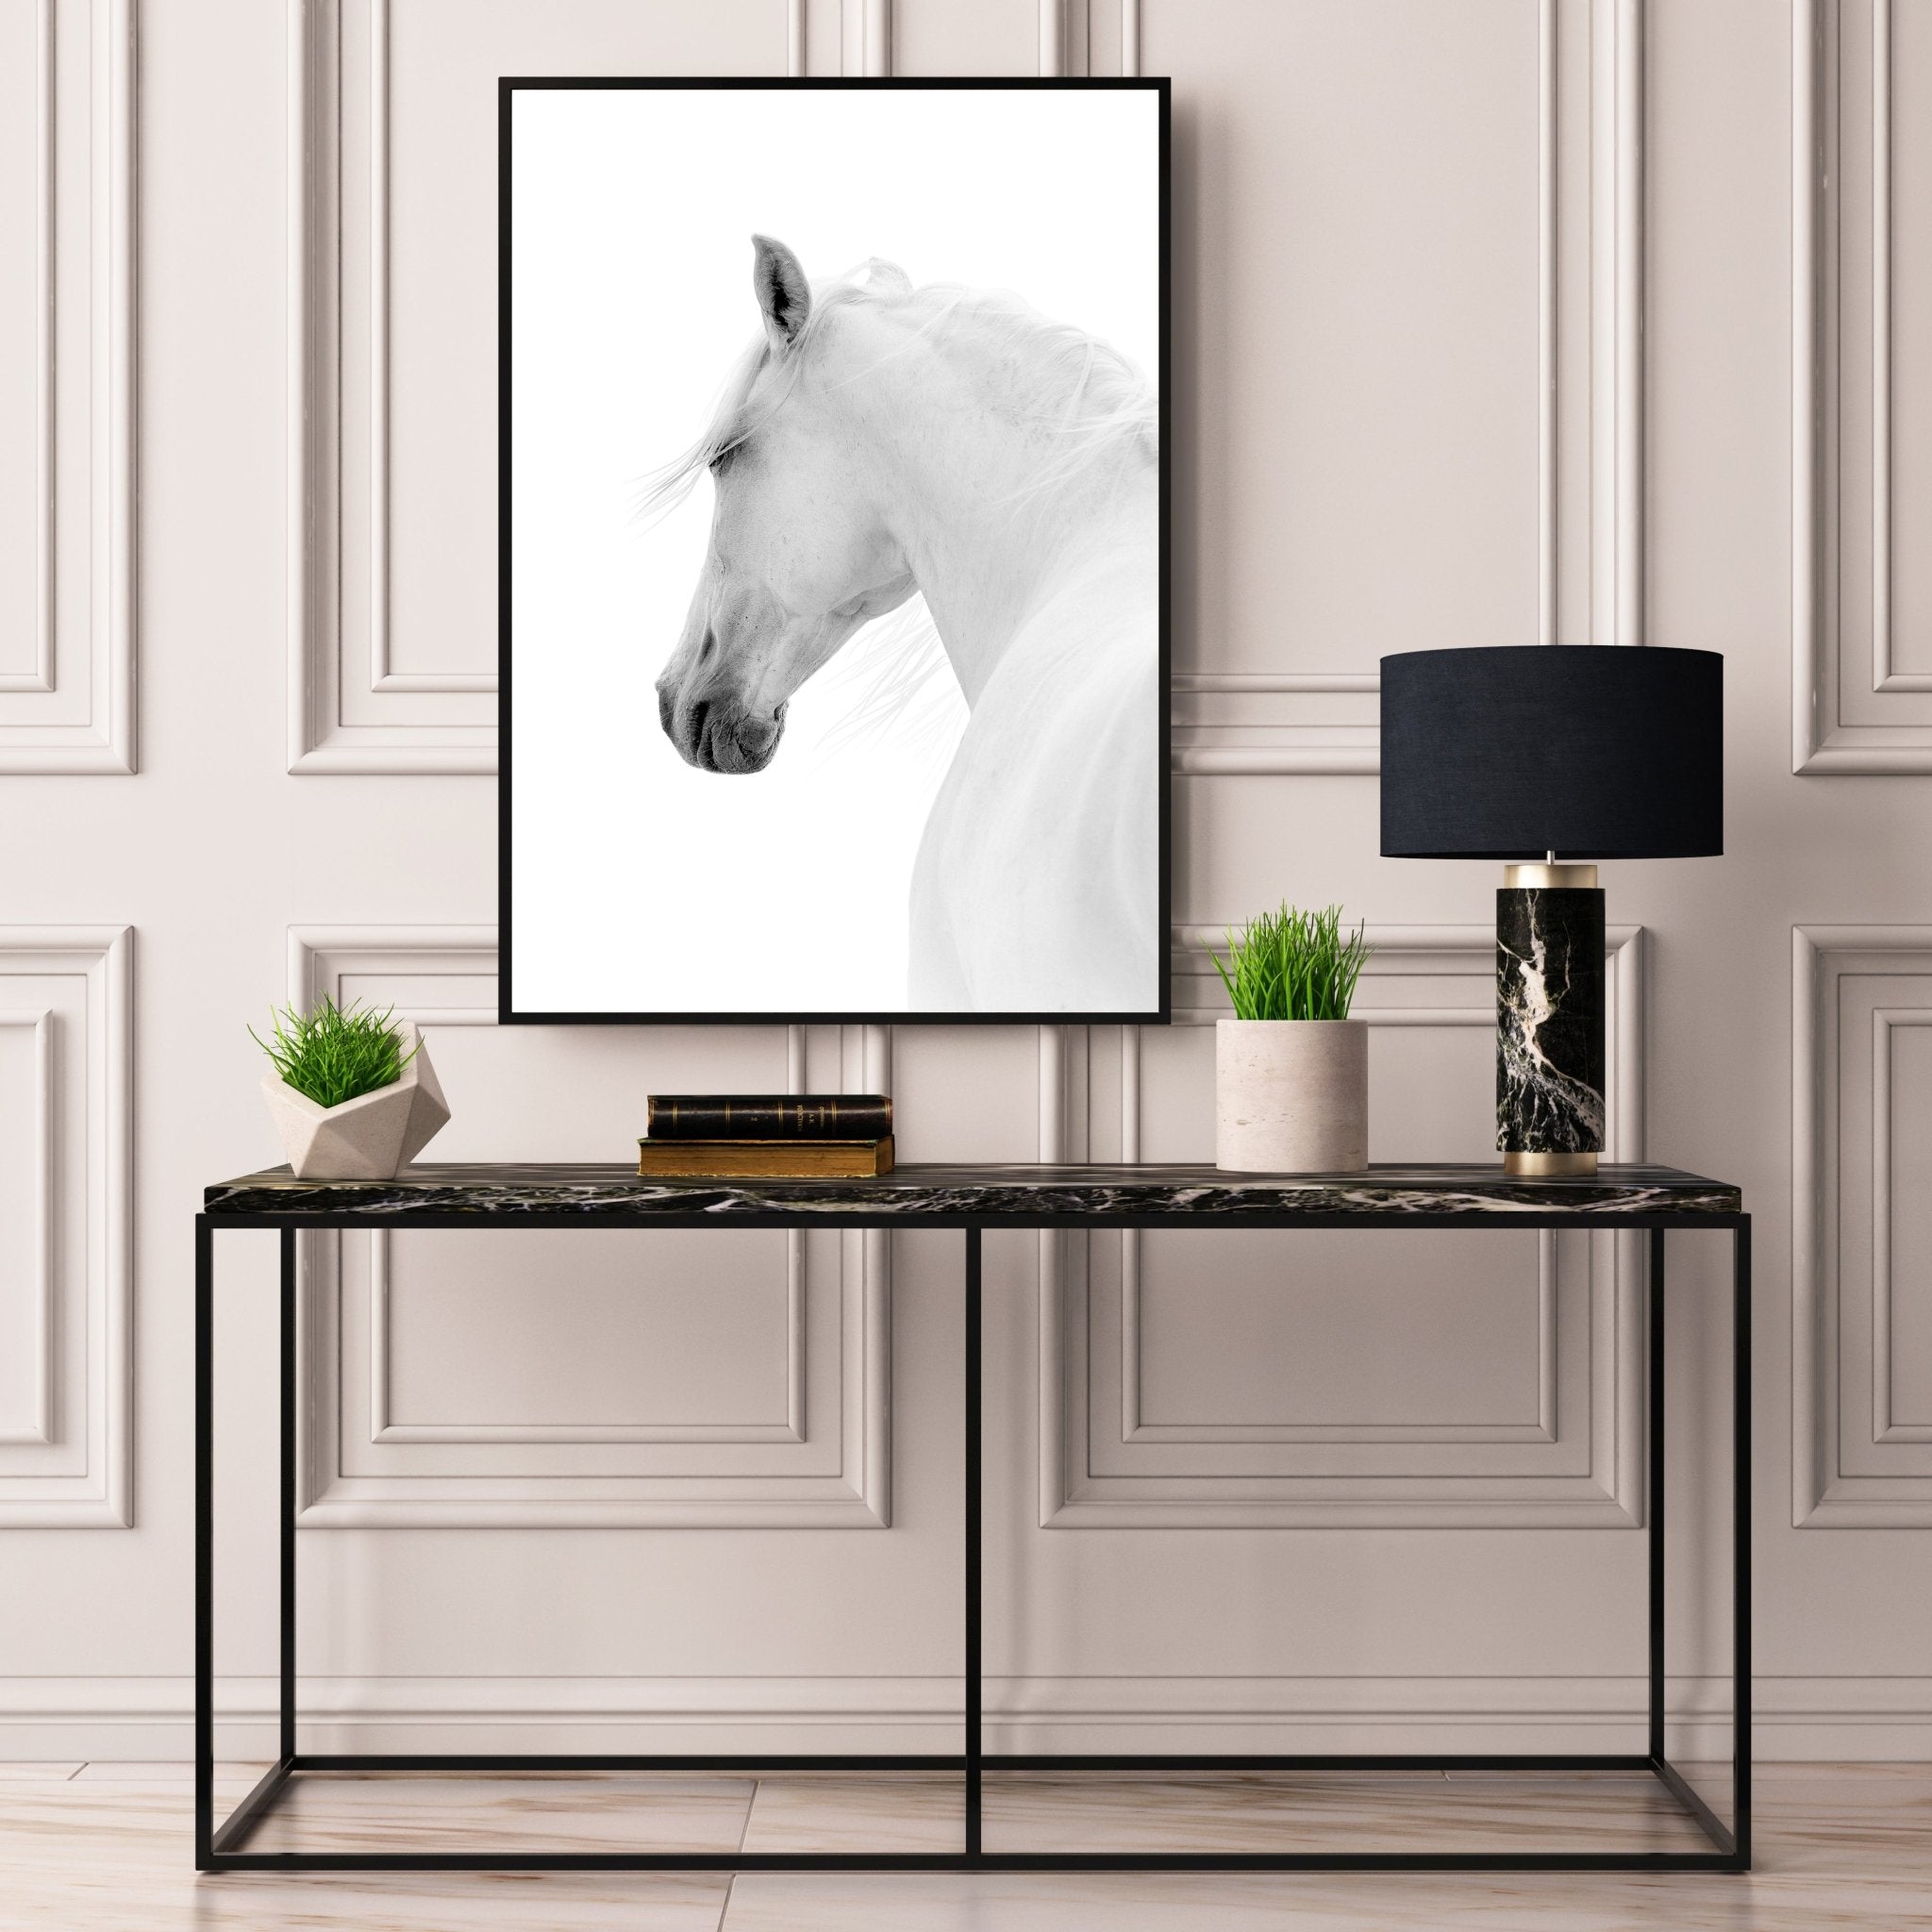 White Horse - D'Luxe Prints